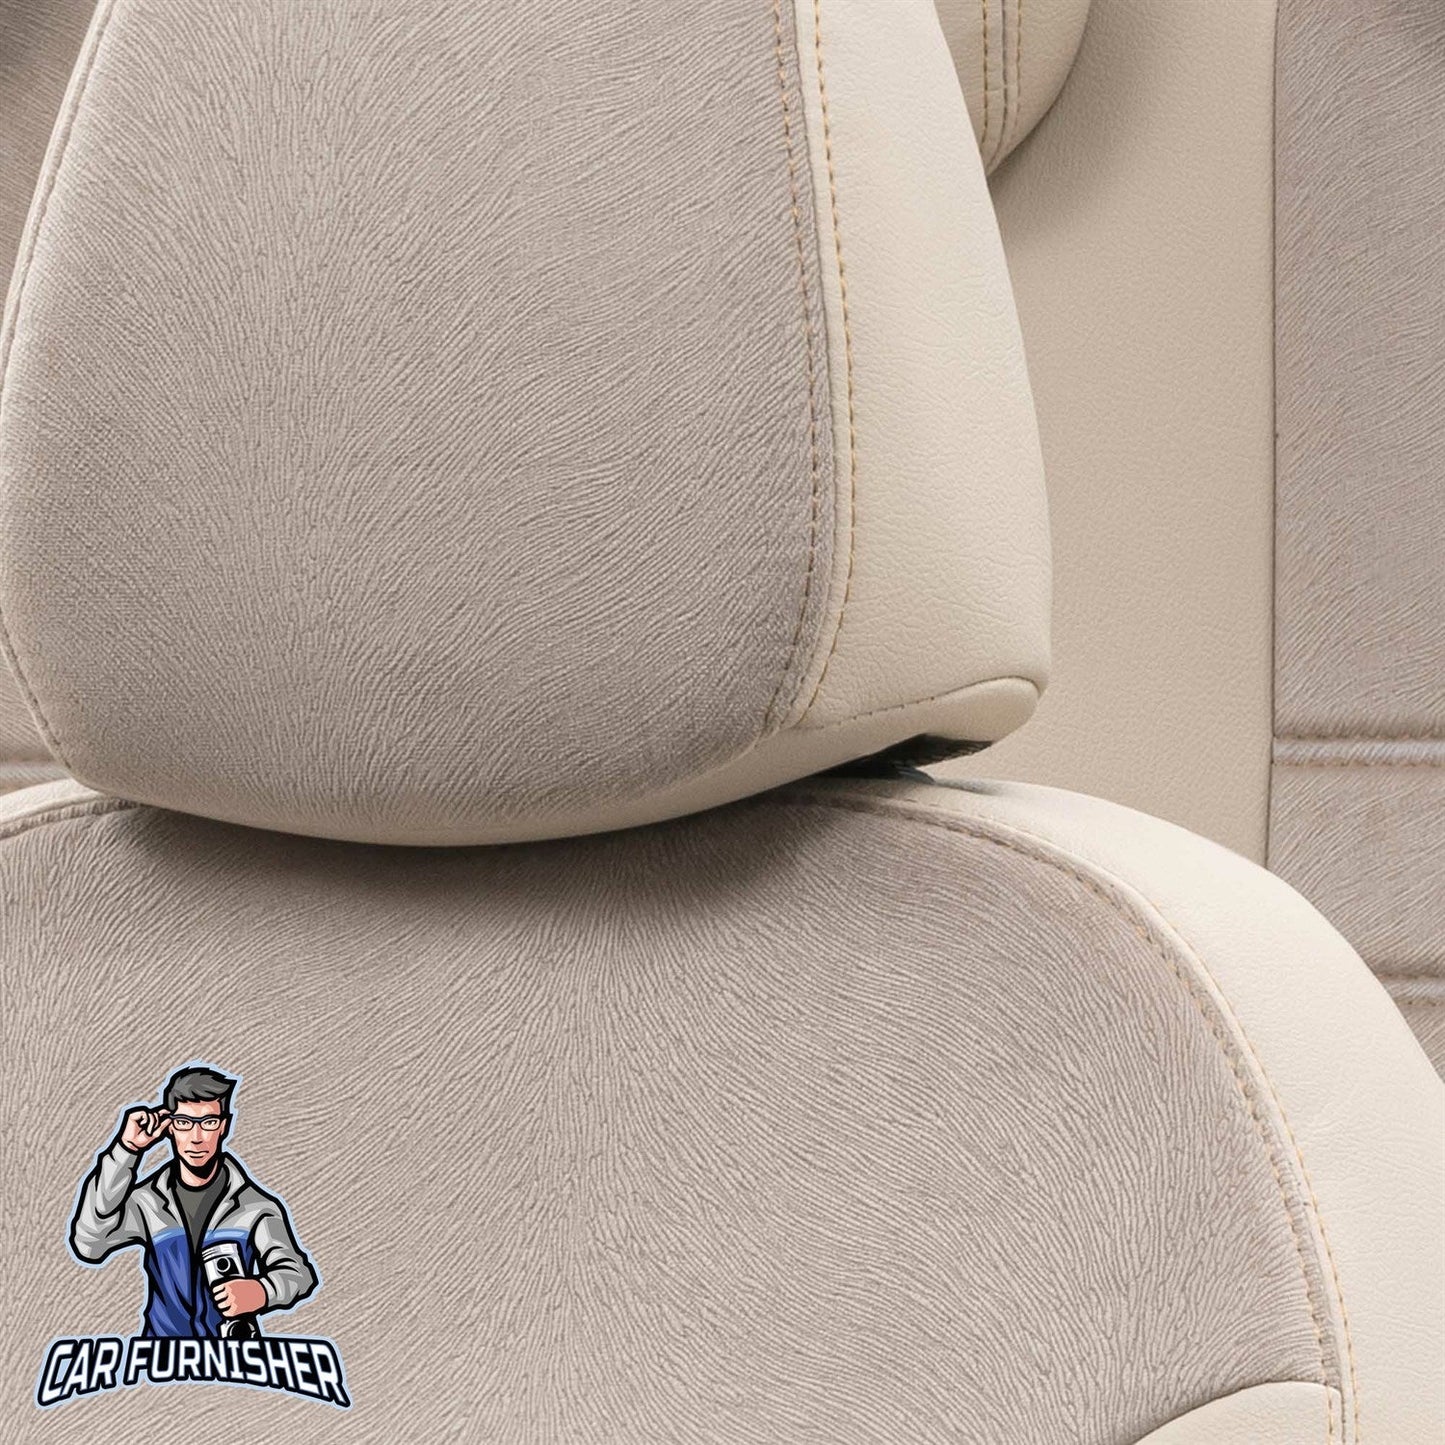 Fiat Scudo Seat Covers London Foal Feather Design Beige Leather & Foal Feather